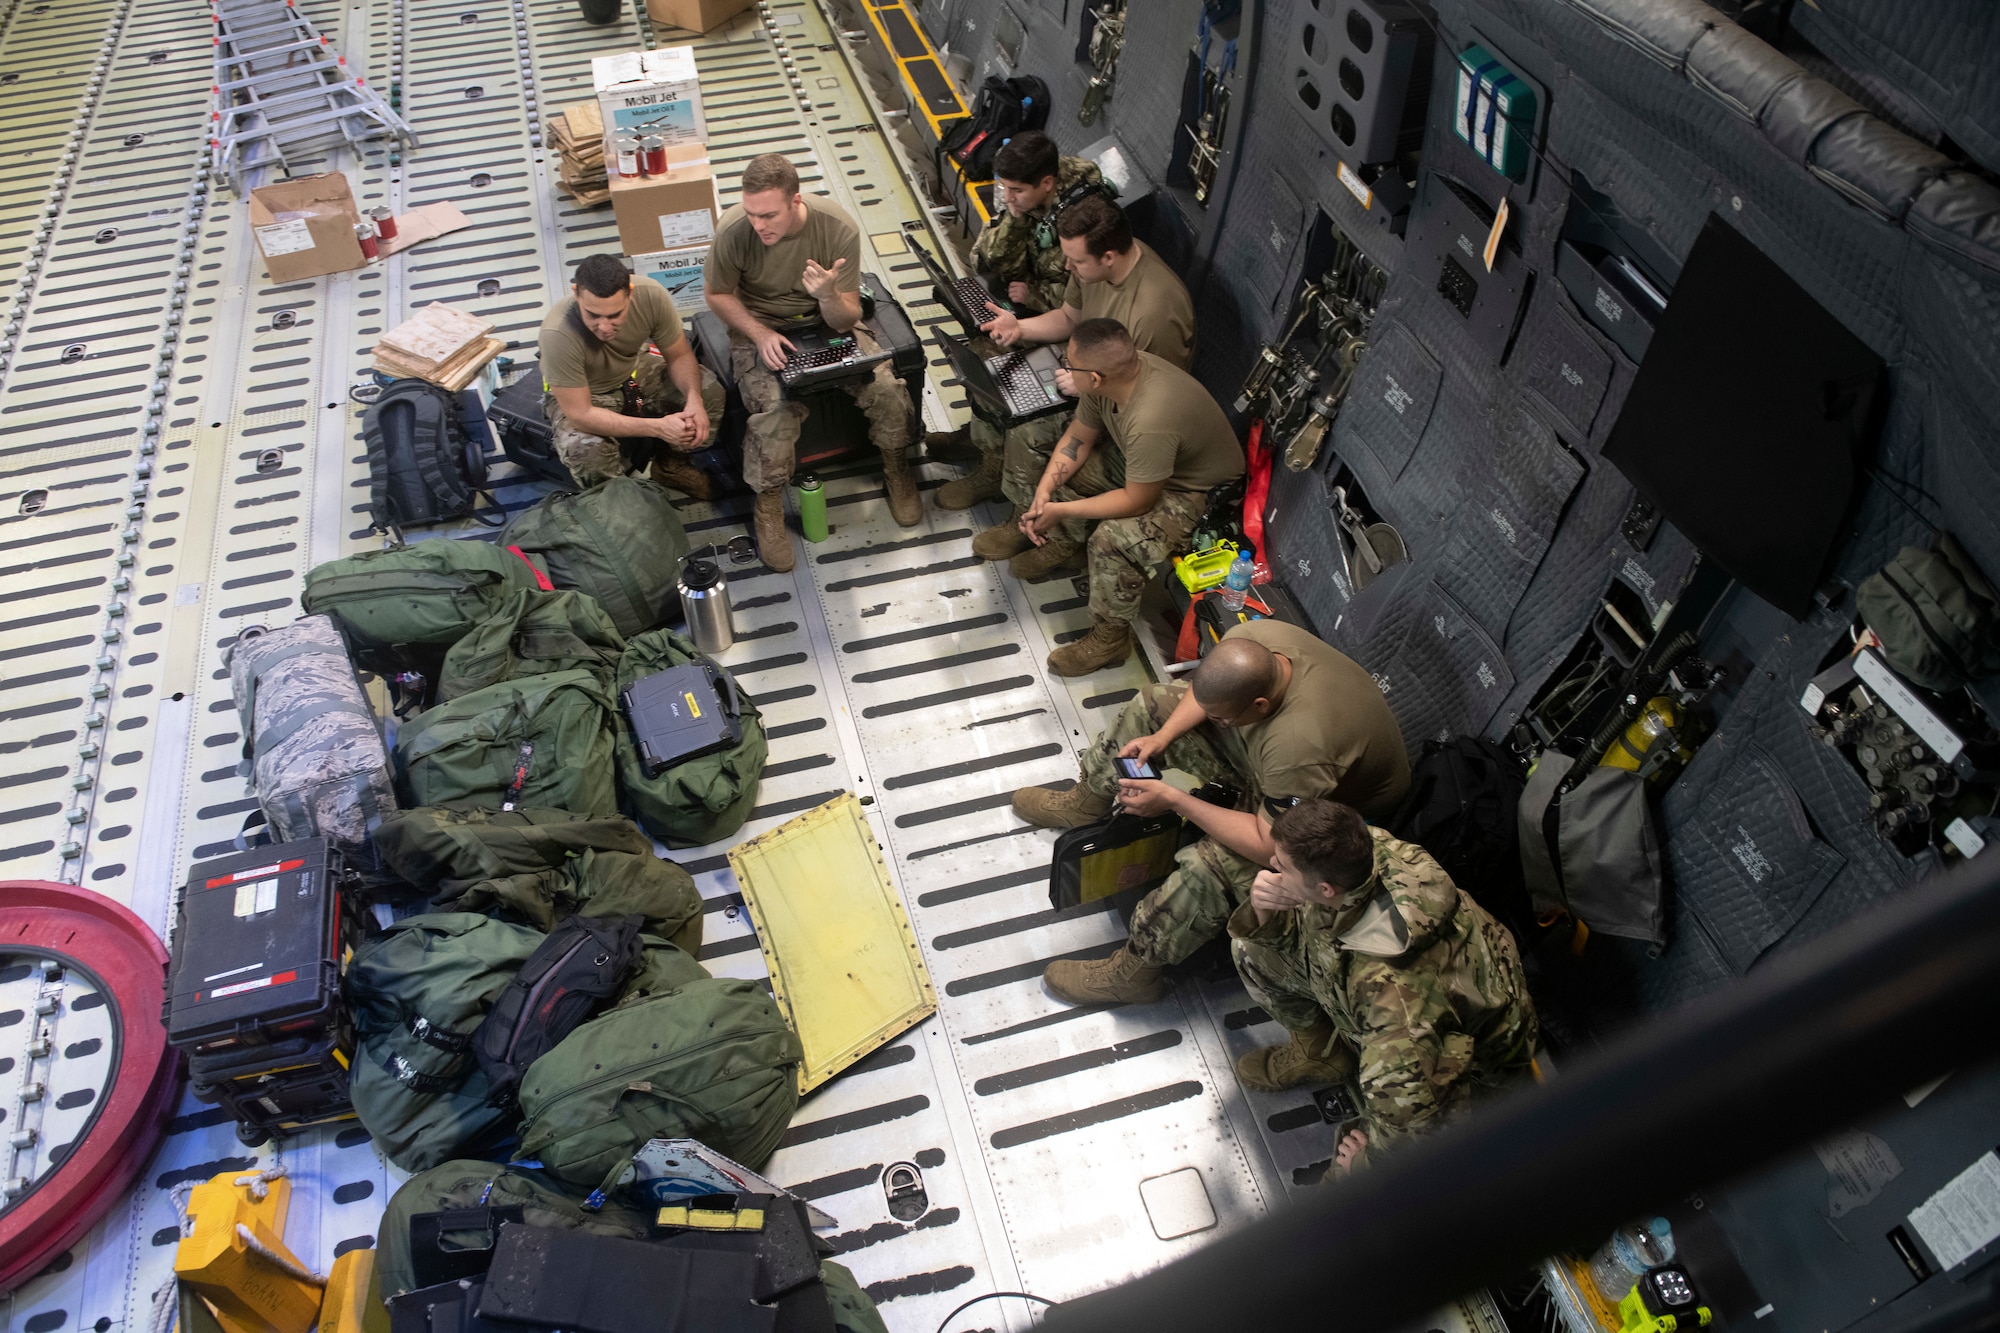 730th Air Mobility Squadron members take a break and check C-5M Super Galaxy guidance at Yokota Air Base, Japan, Sept. 15, 2021. Through a special request to Pacific Air Forces, the 730th AMS was able to utilize a C-5M for familiarization training. (U.S. Air Force photo by Staff Sgt. Joshua Edwards)